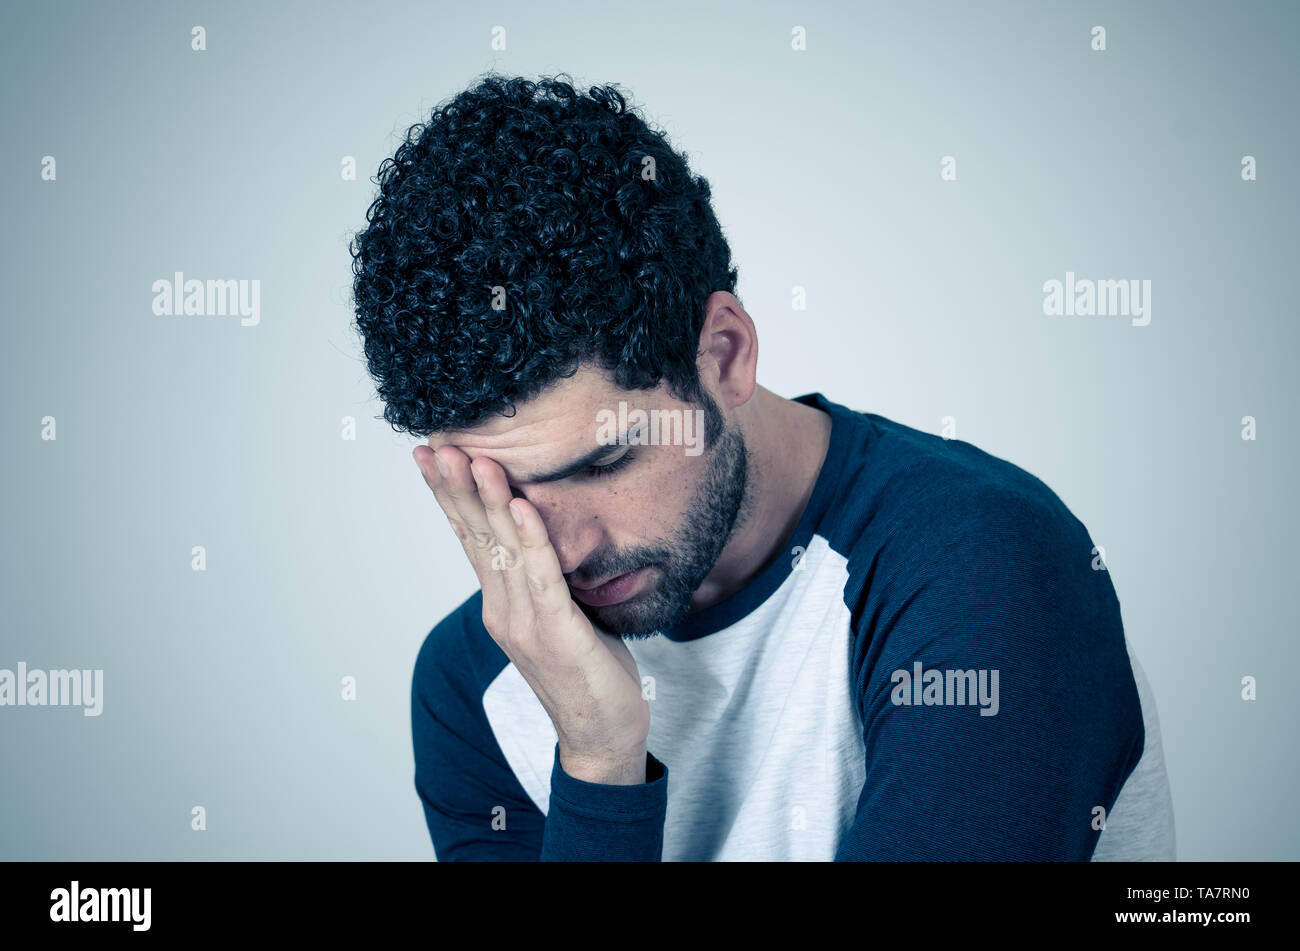 Young sad man, worried and concerned, looking depressed and desperate feeling sorrow. Portrait with copy space. In People, facial expressions and emot Stock Photo